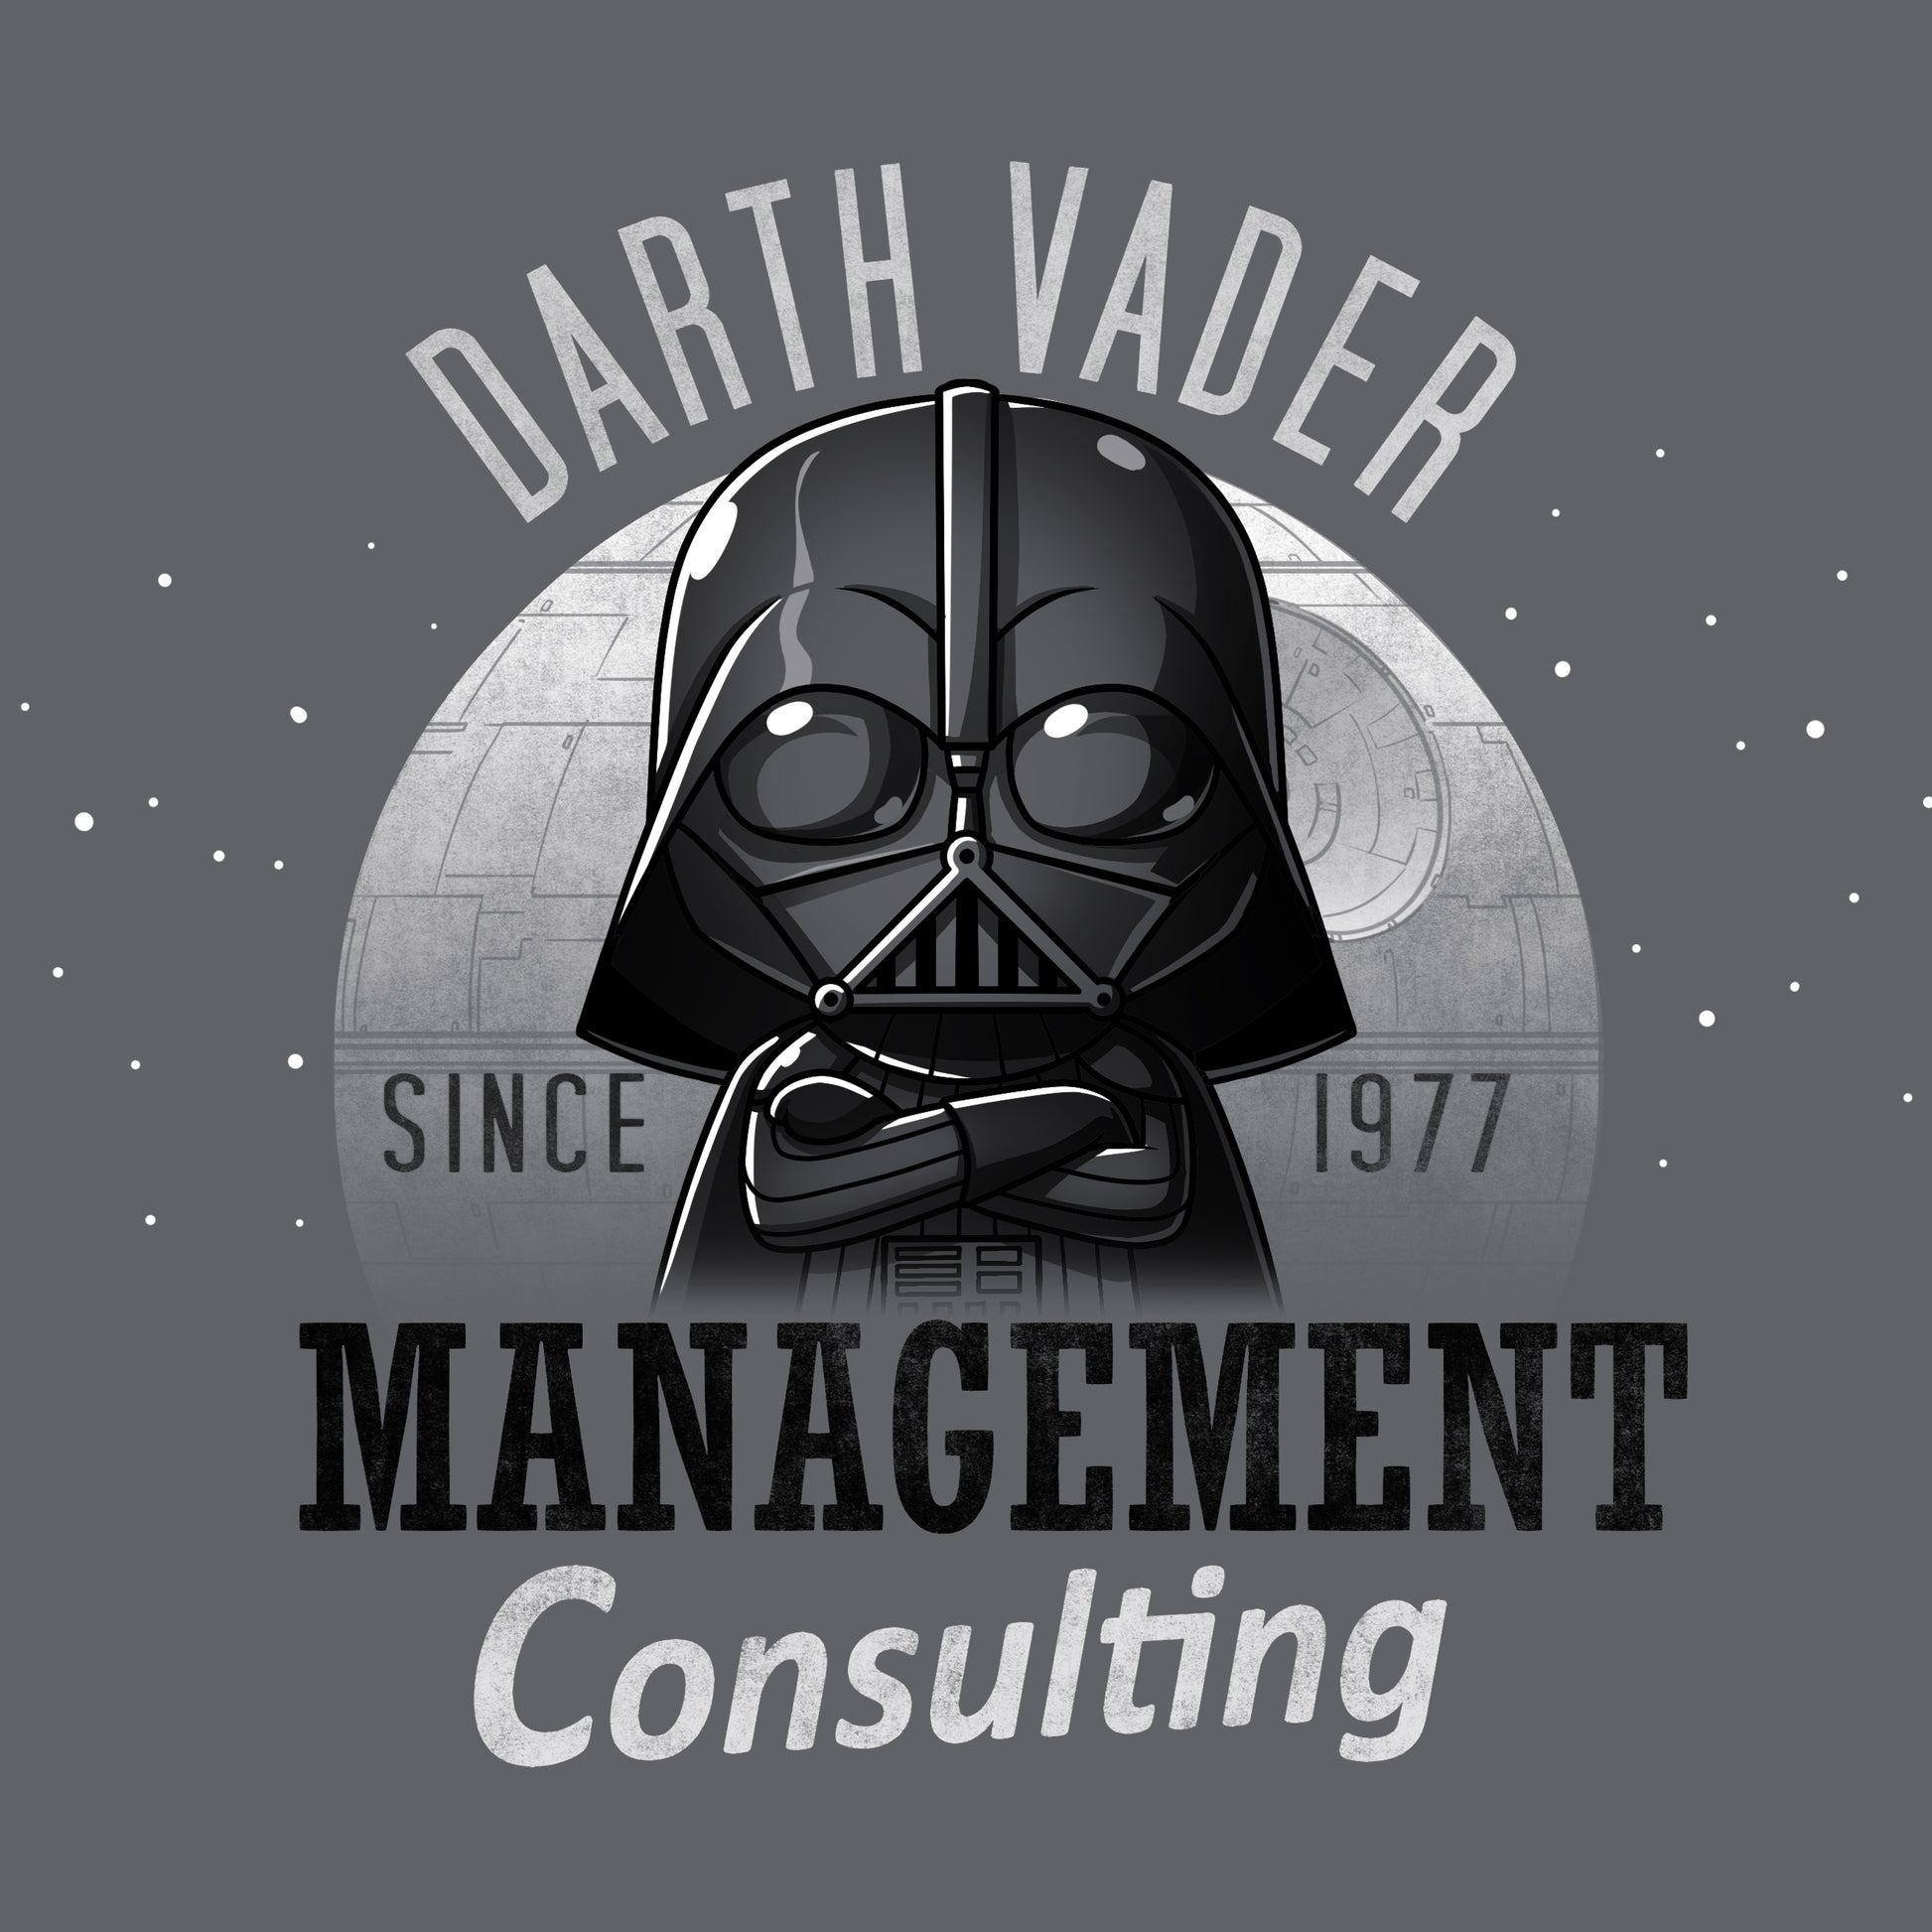 Officially licensed Star Wars Darth Vader management consulting.